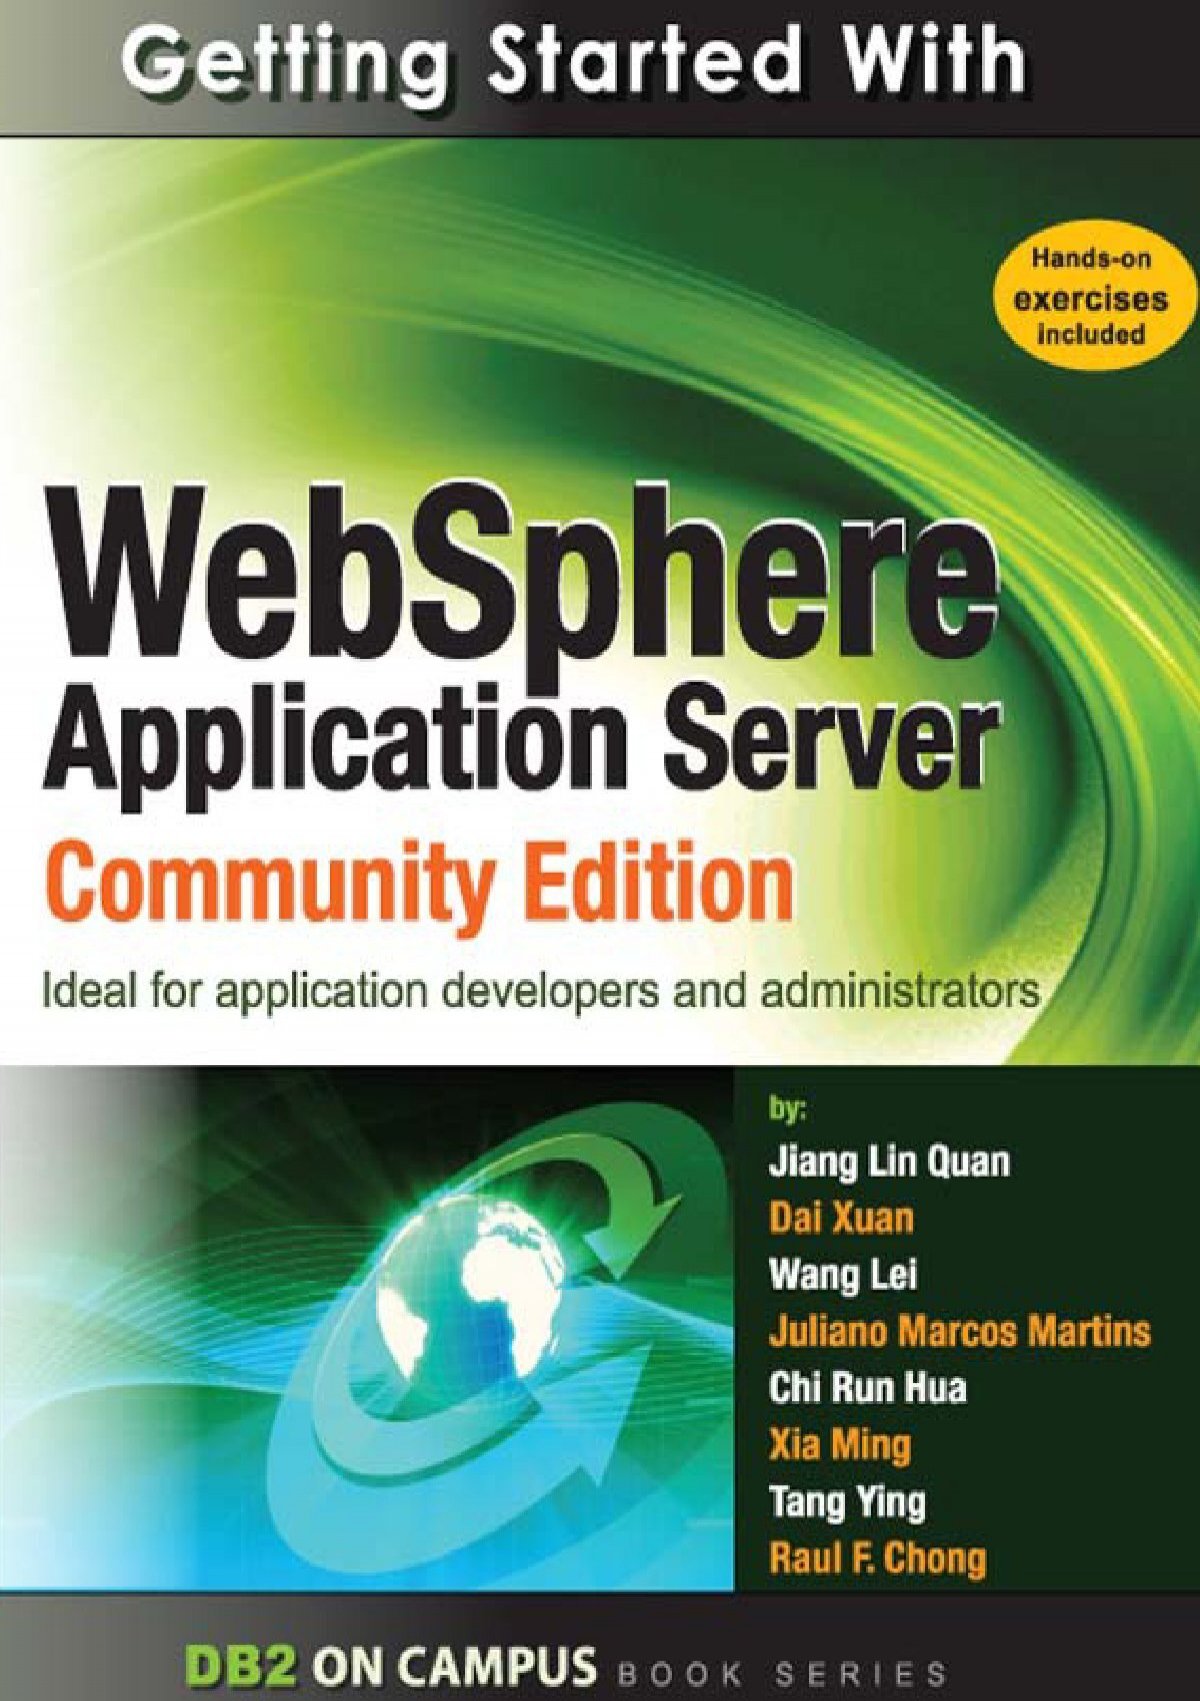 Getting Started With Websphere Application Server 8806